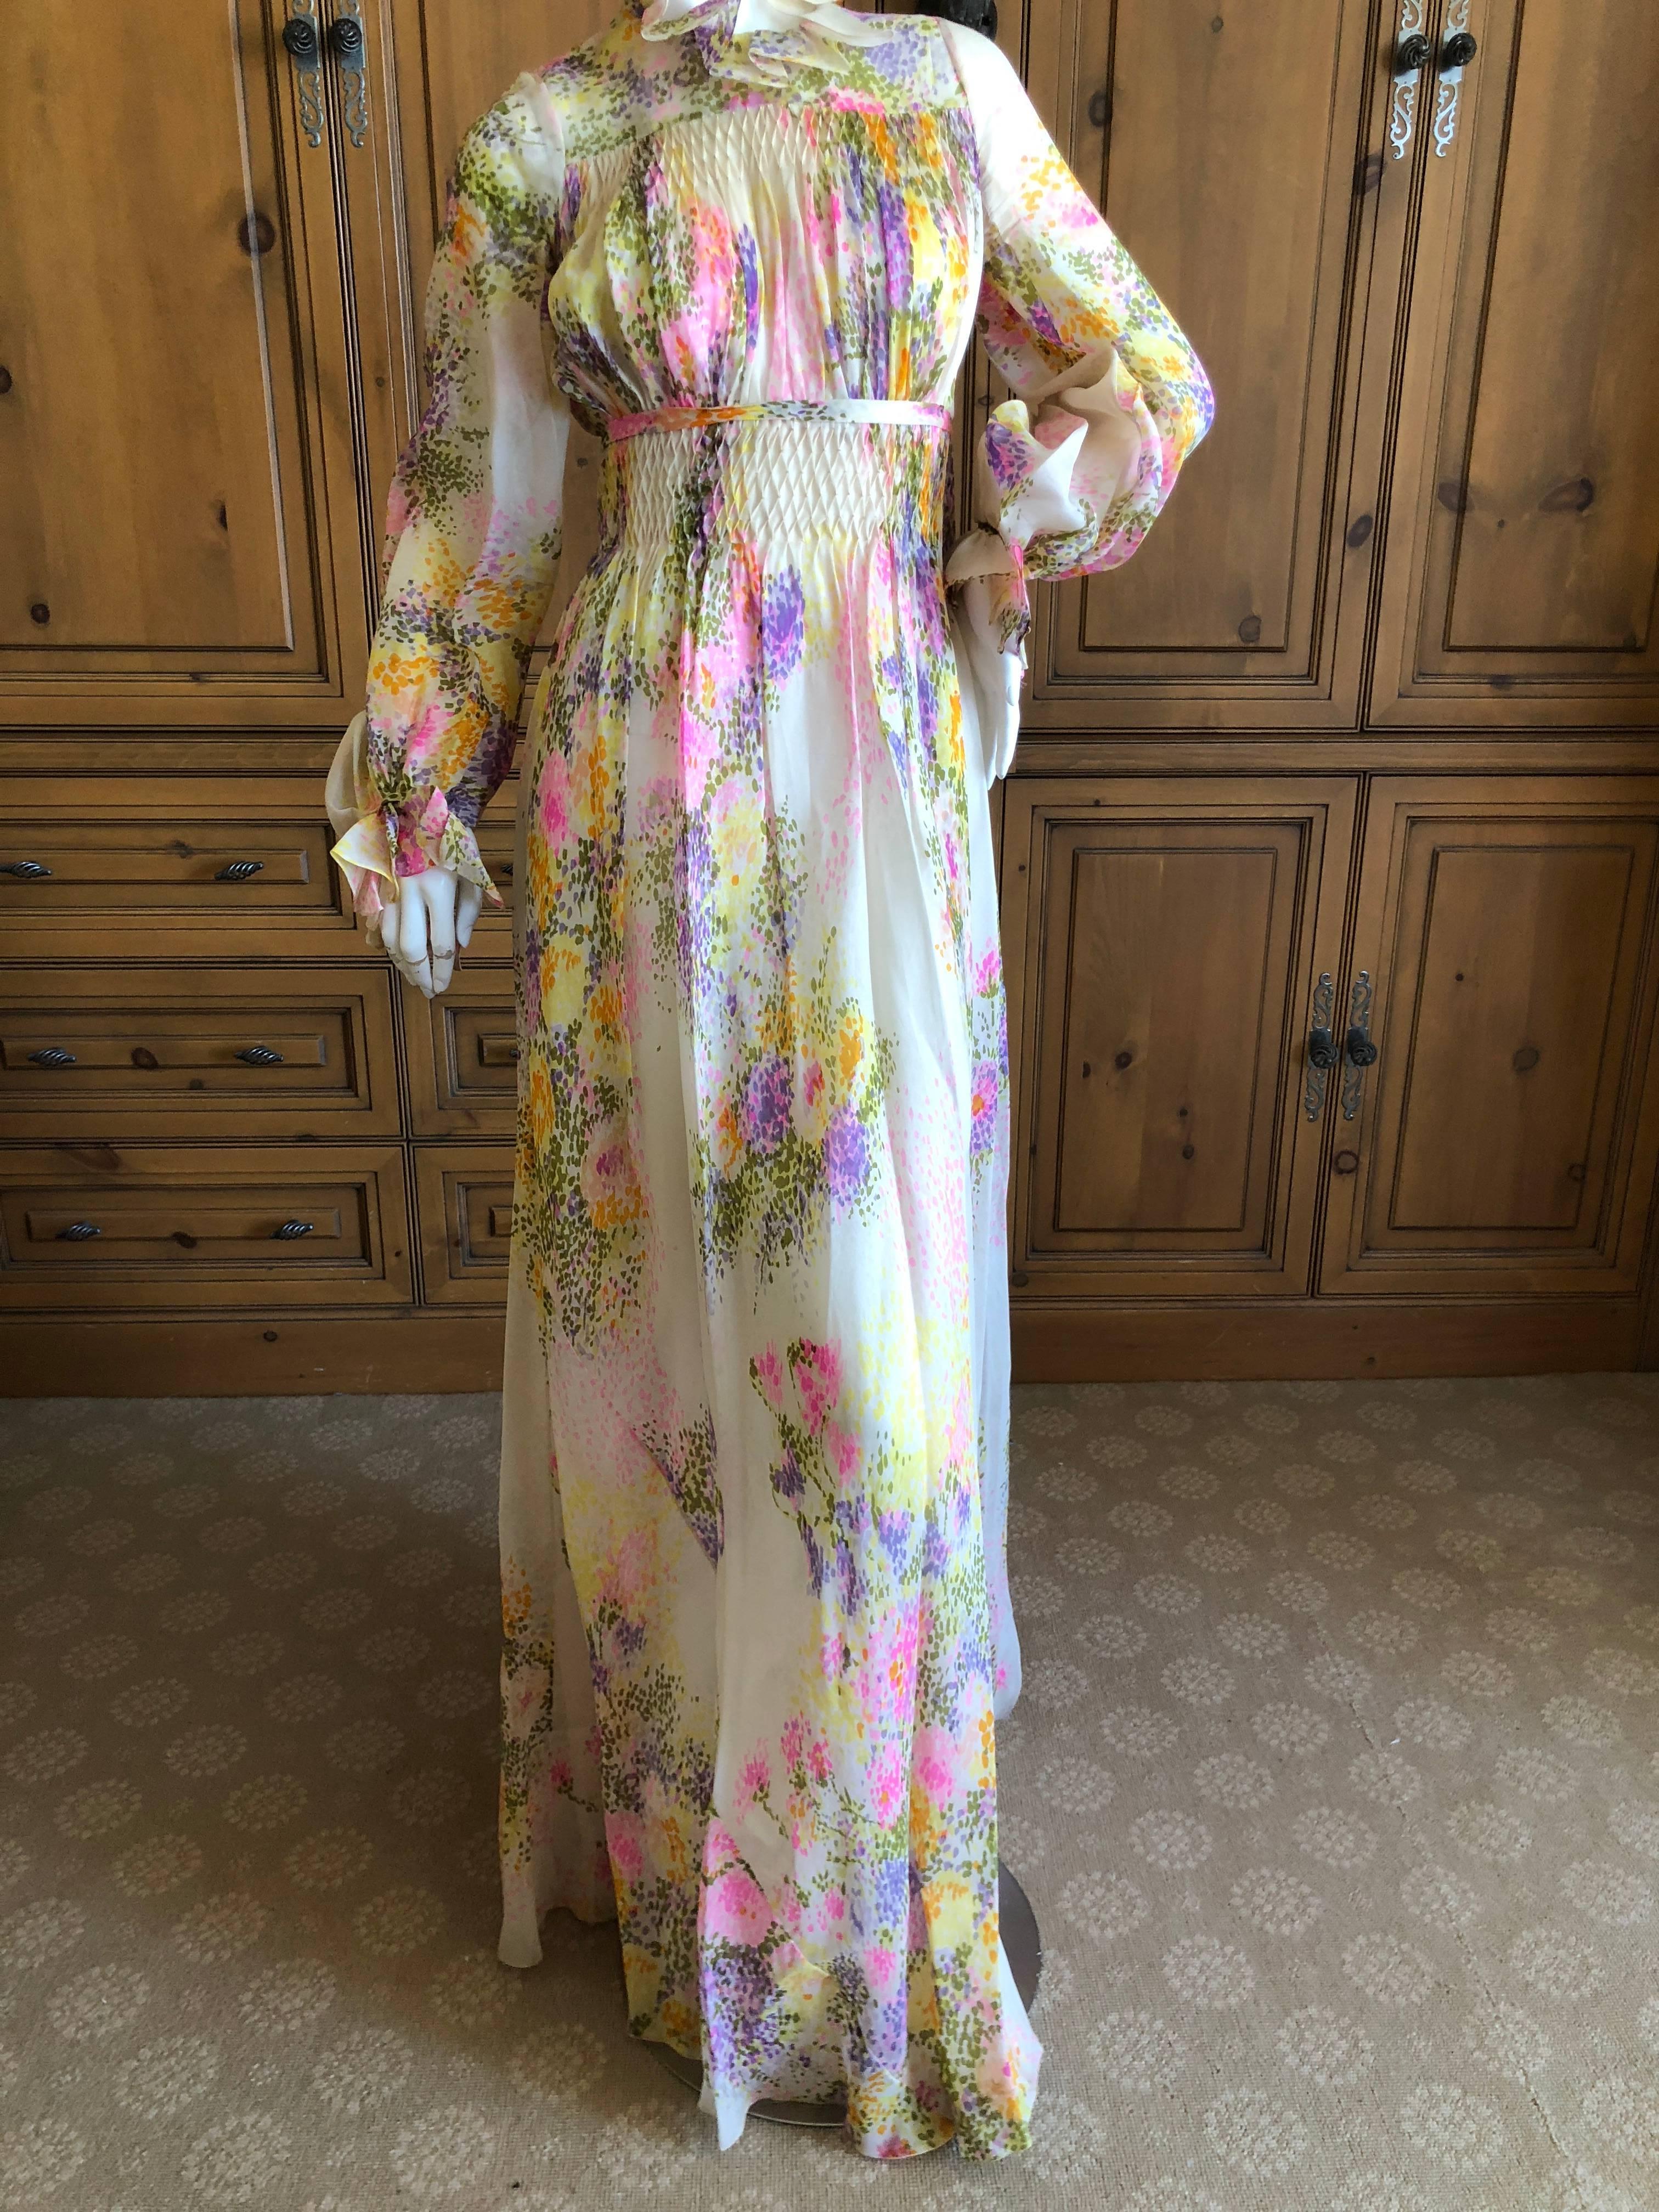 Cardinali Ruffle Silk Chiffon Floral Evening Dress with Pin Tuck Details, 1970s  For Sale 1